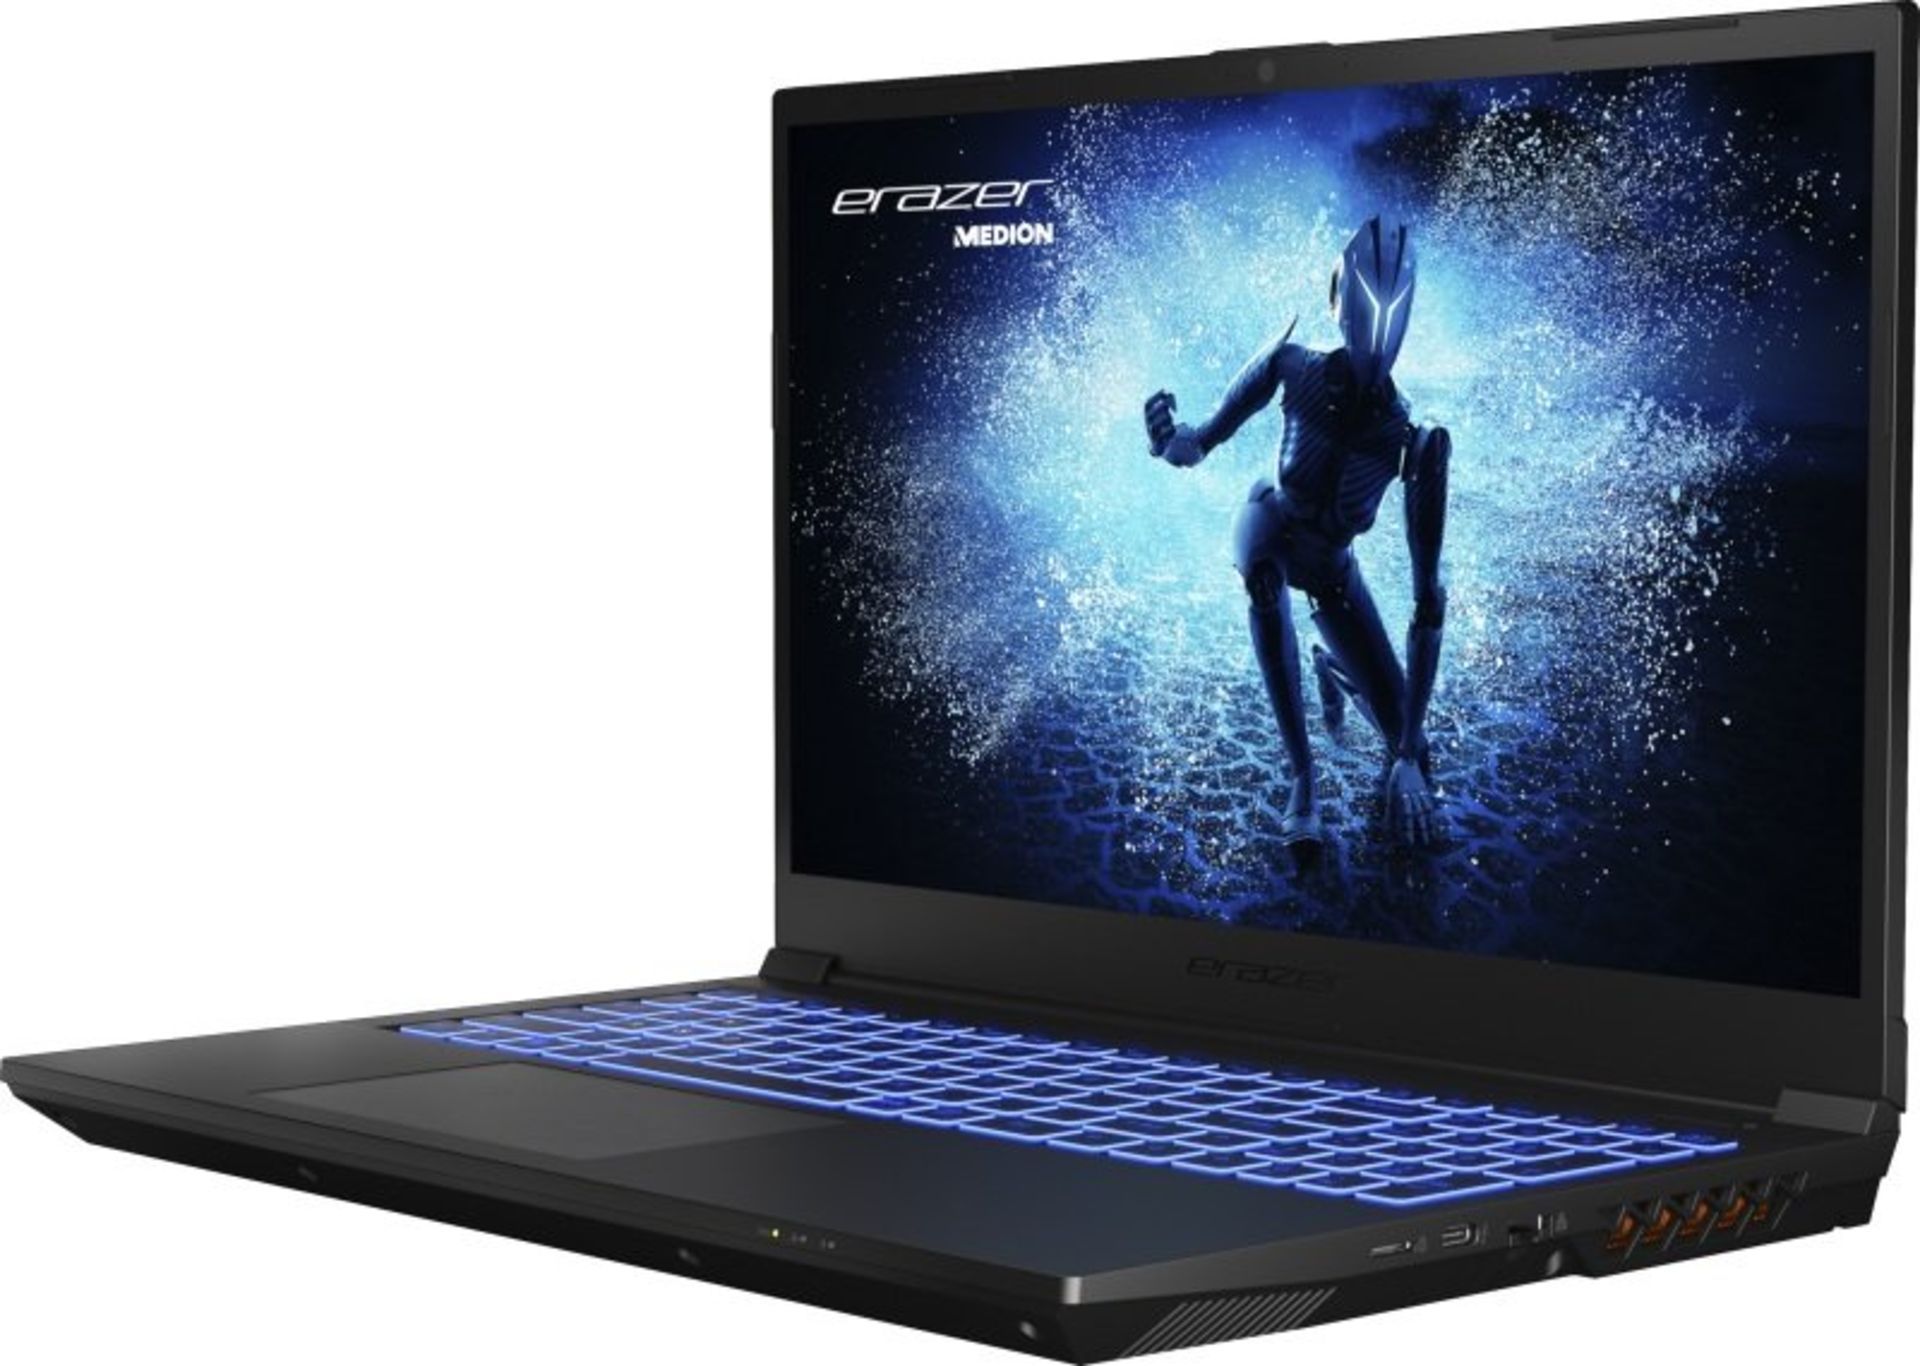 NEW & BOXED MEDION Erazer Deputy P50 - MD 62533 Gaming Laptop. RRP £1306.66. Intel Core i7-12700H, - Image 3 of 6